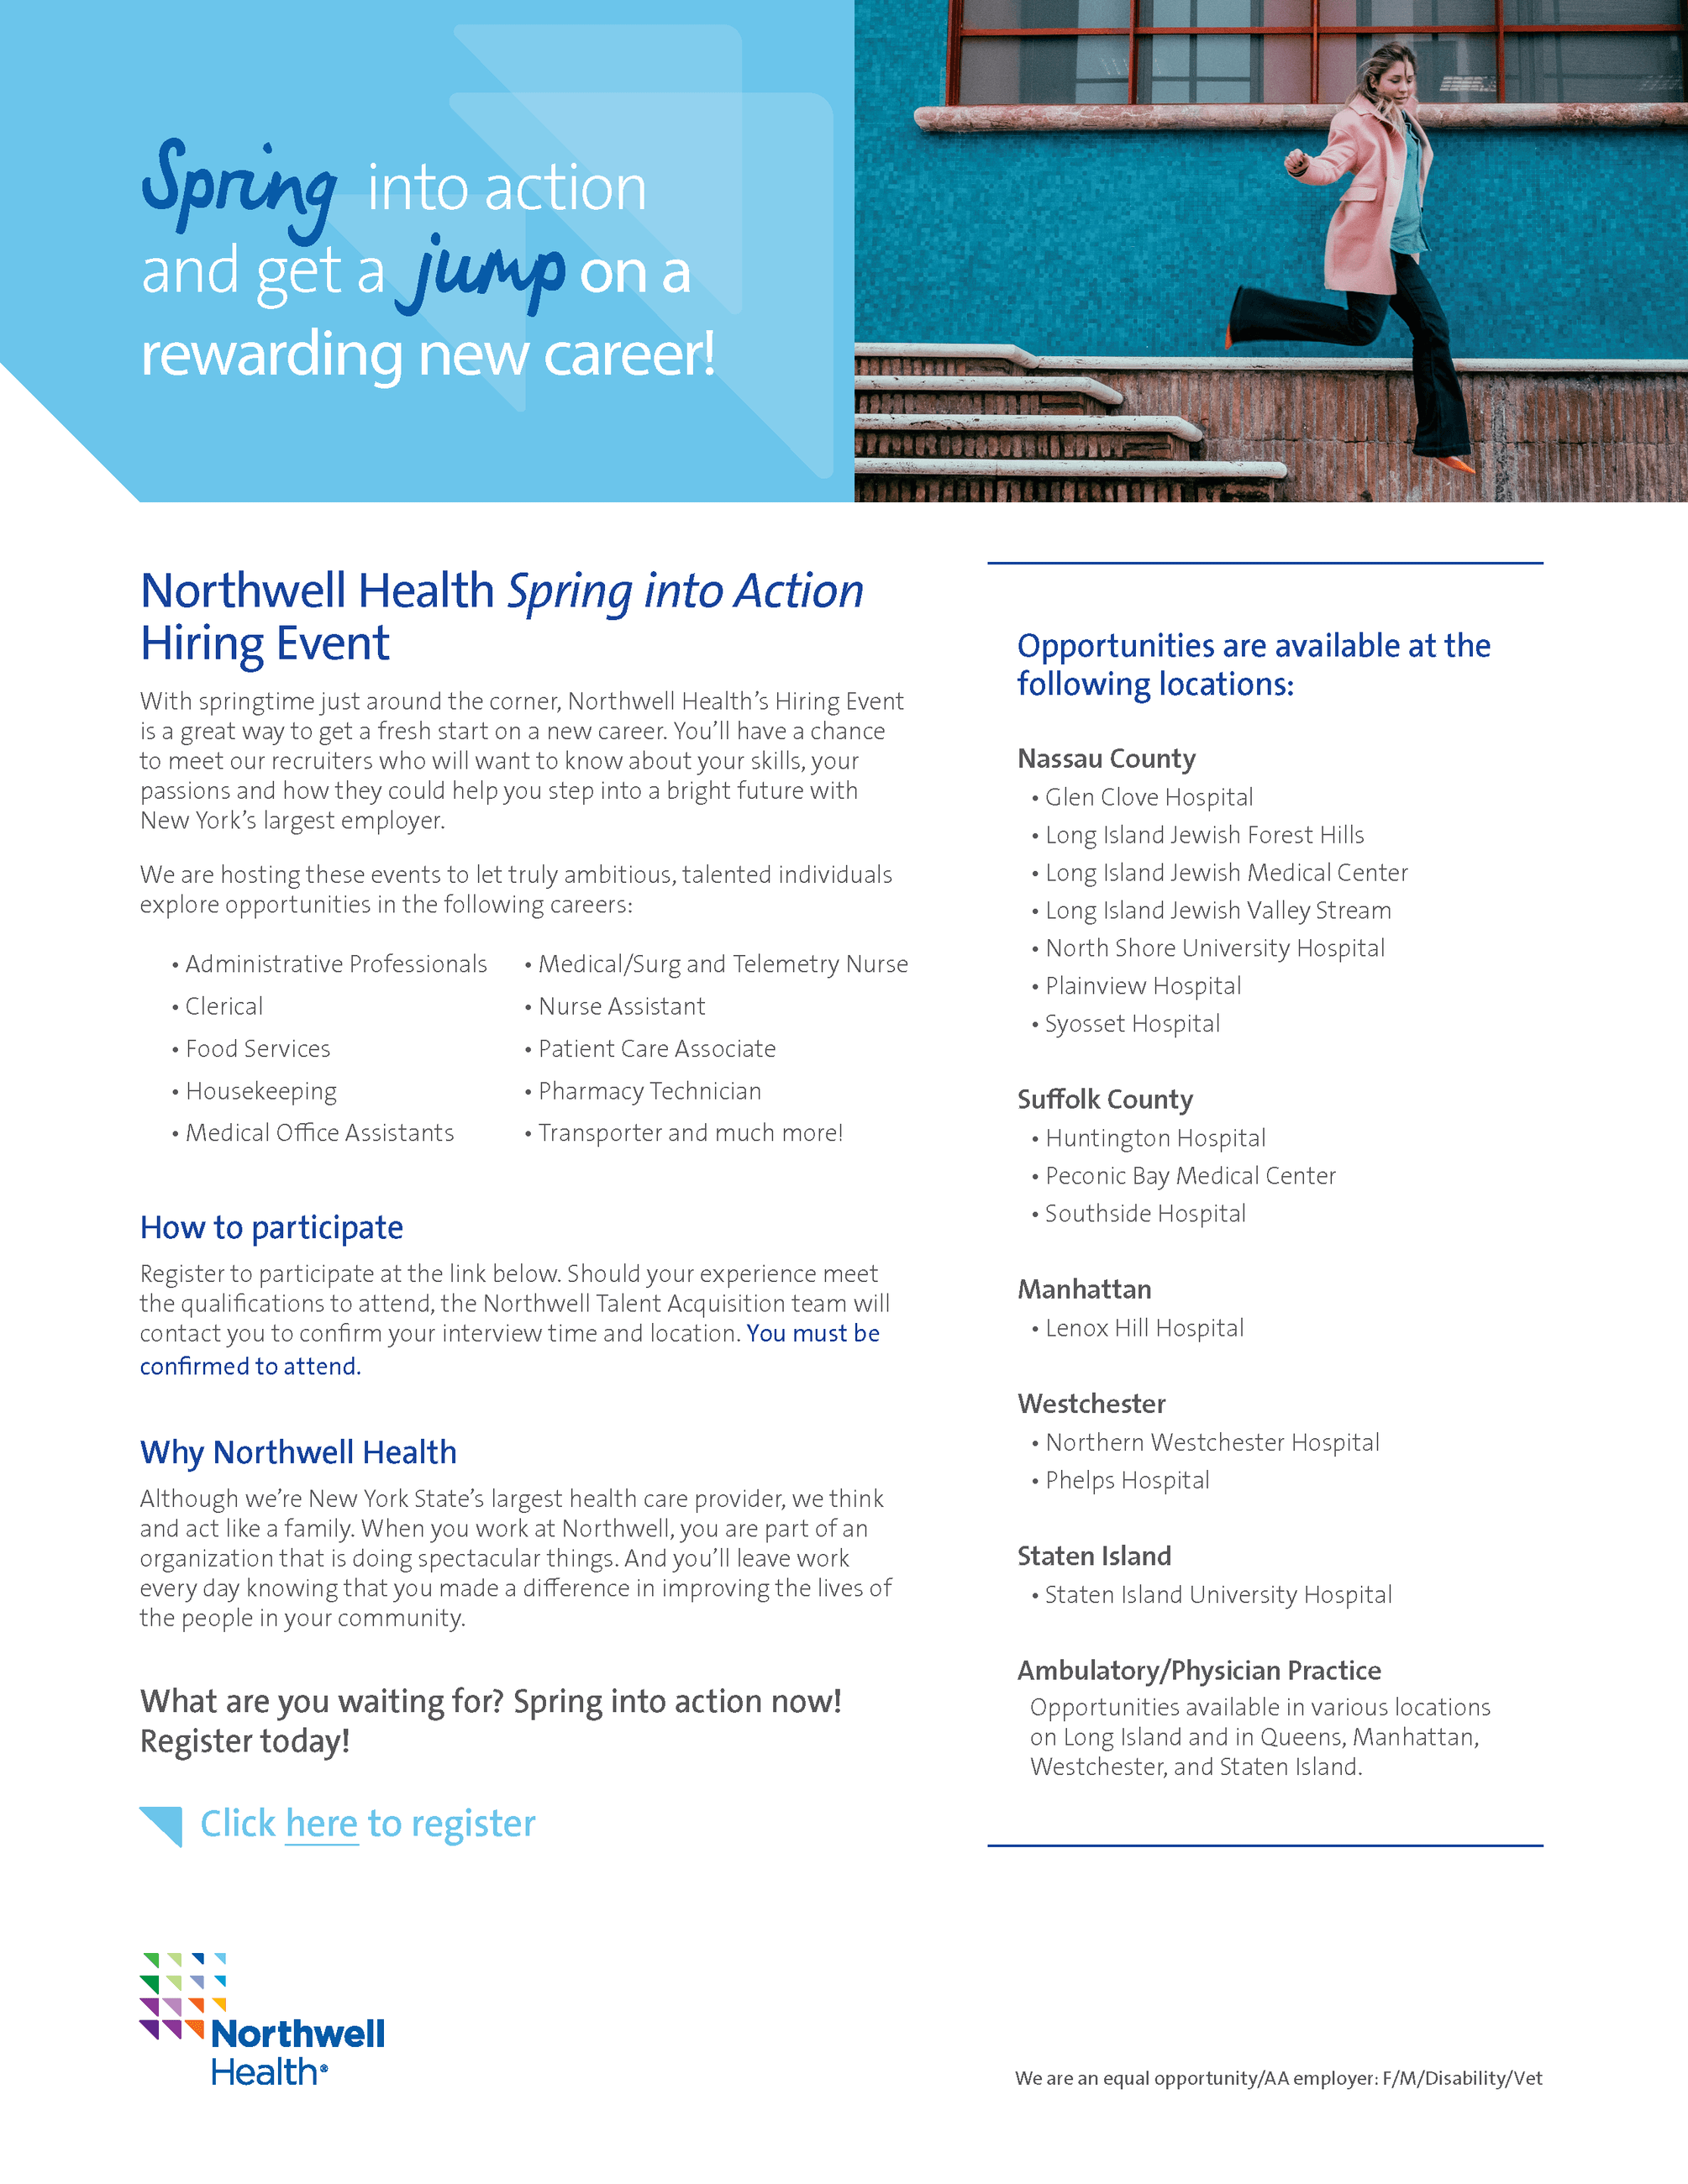 Spring into Action Hiring Event Flyer